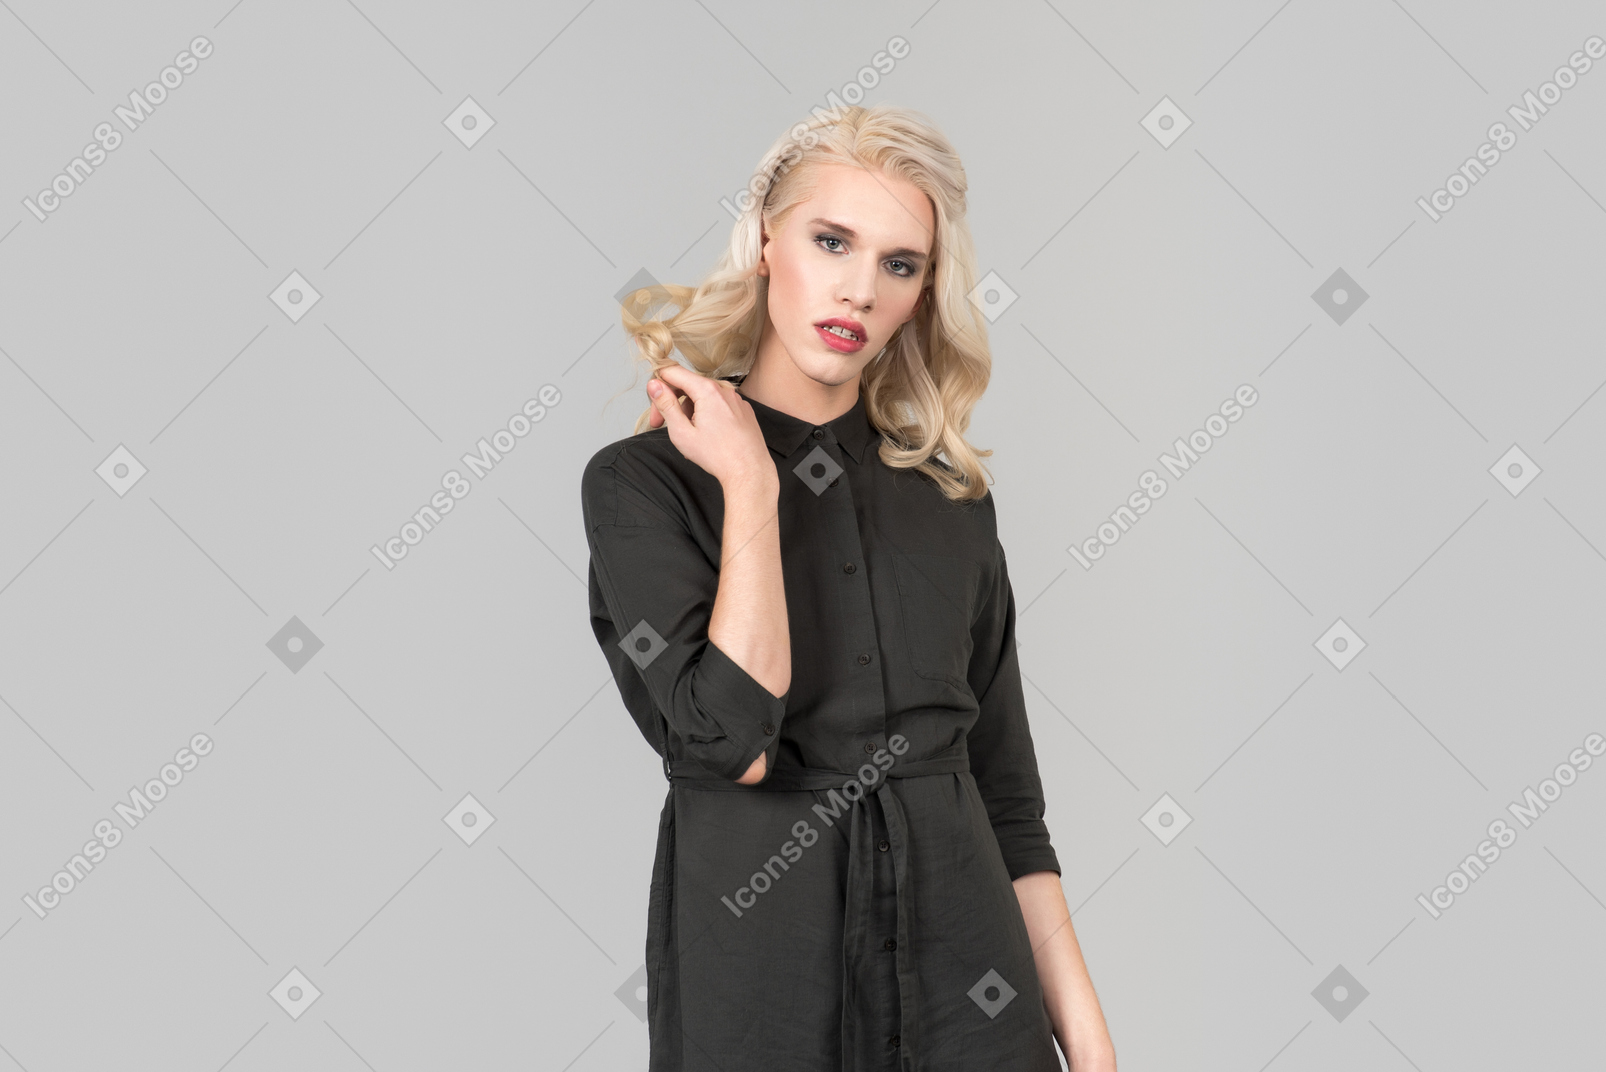 A young blond-haired person in a black dress  standing against the plain grey background